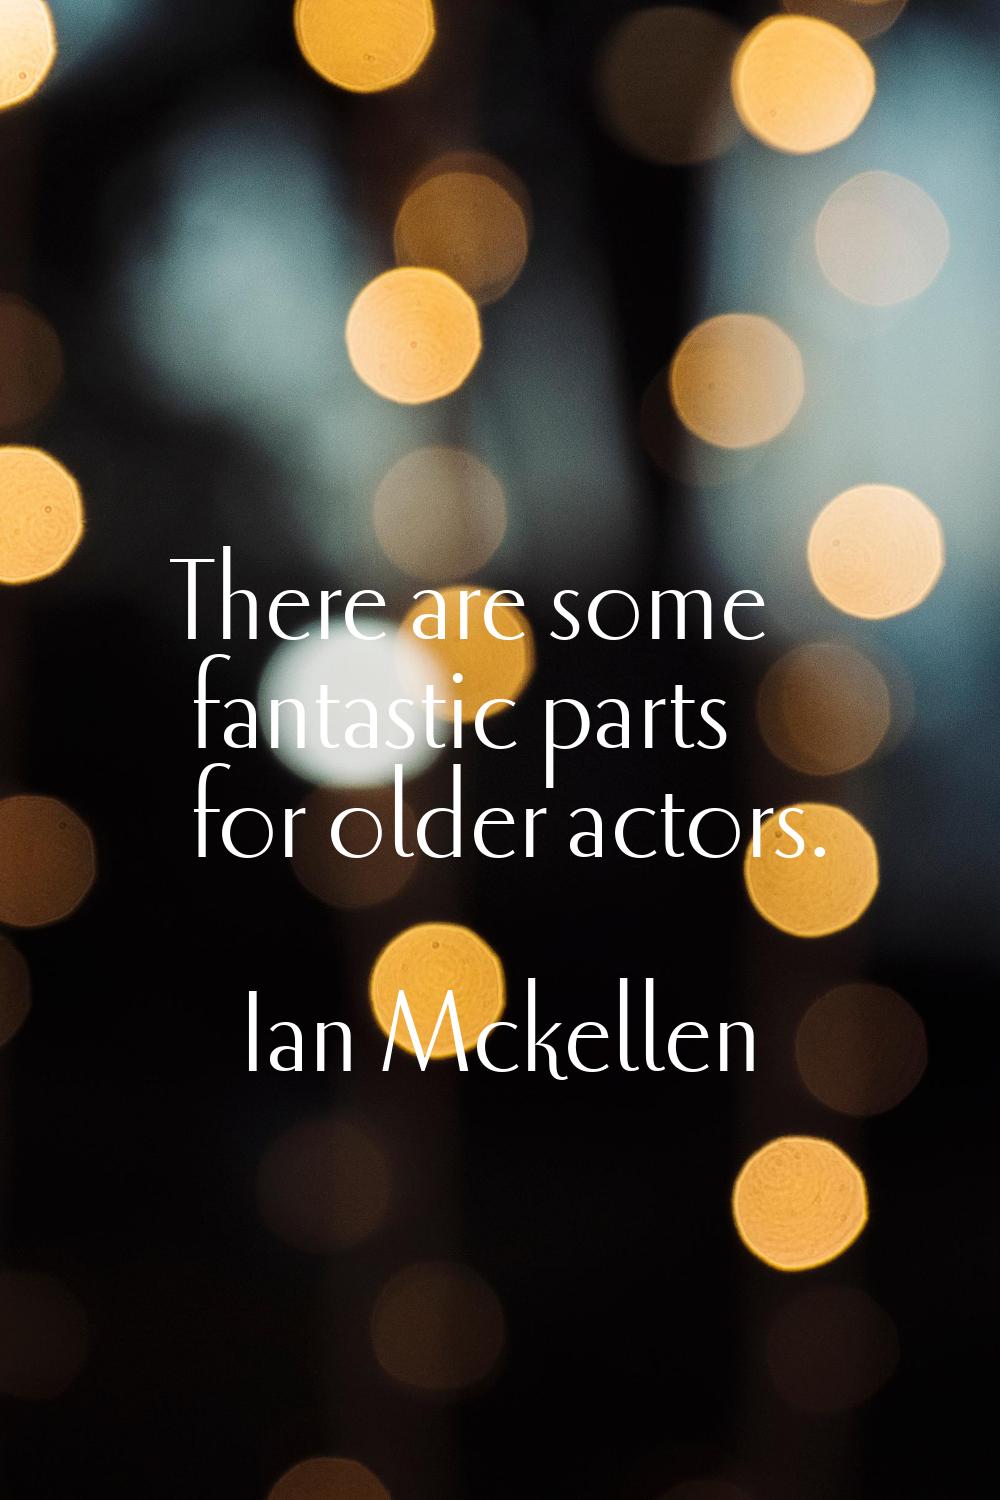 There are some fantastic parts for older actors.